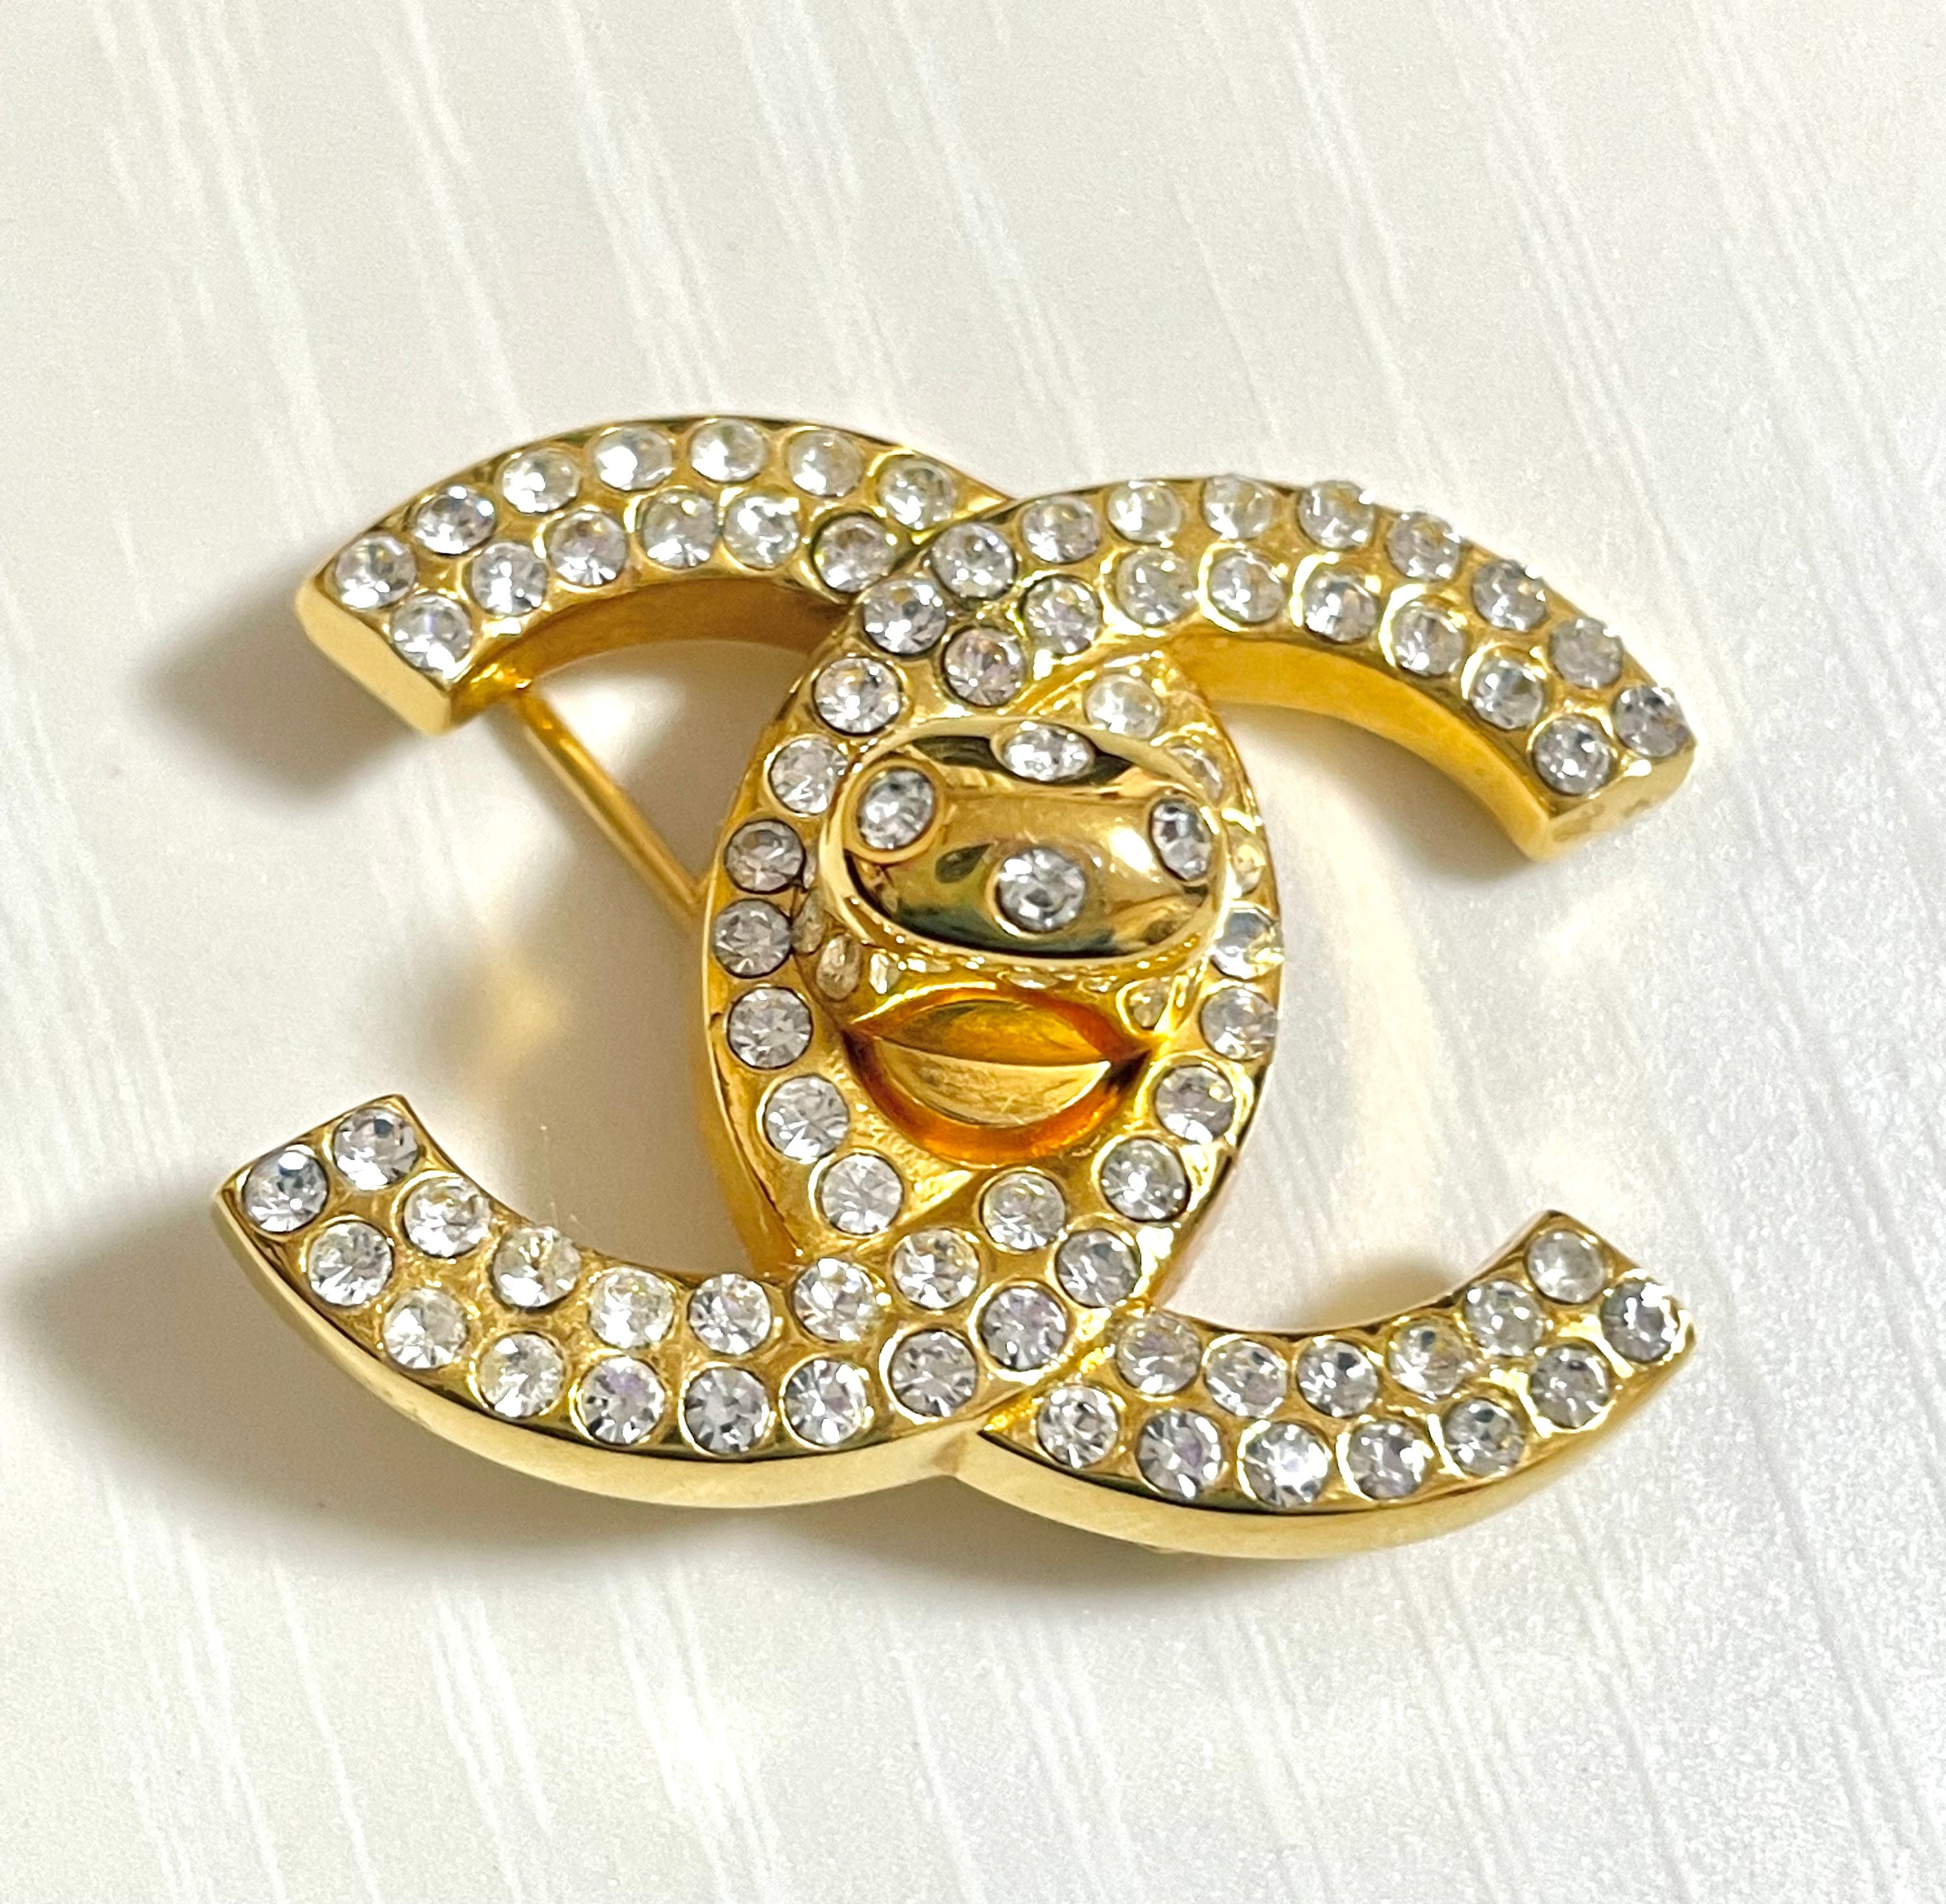 Vintage CHANEL golden turn lock CC pin brooch with crystals. Very classic and popular jewelry. Coco mark brooch. 0411251